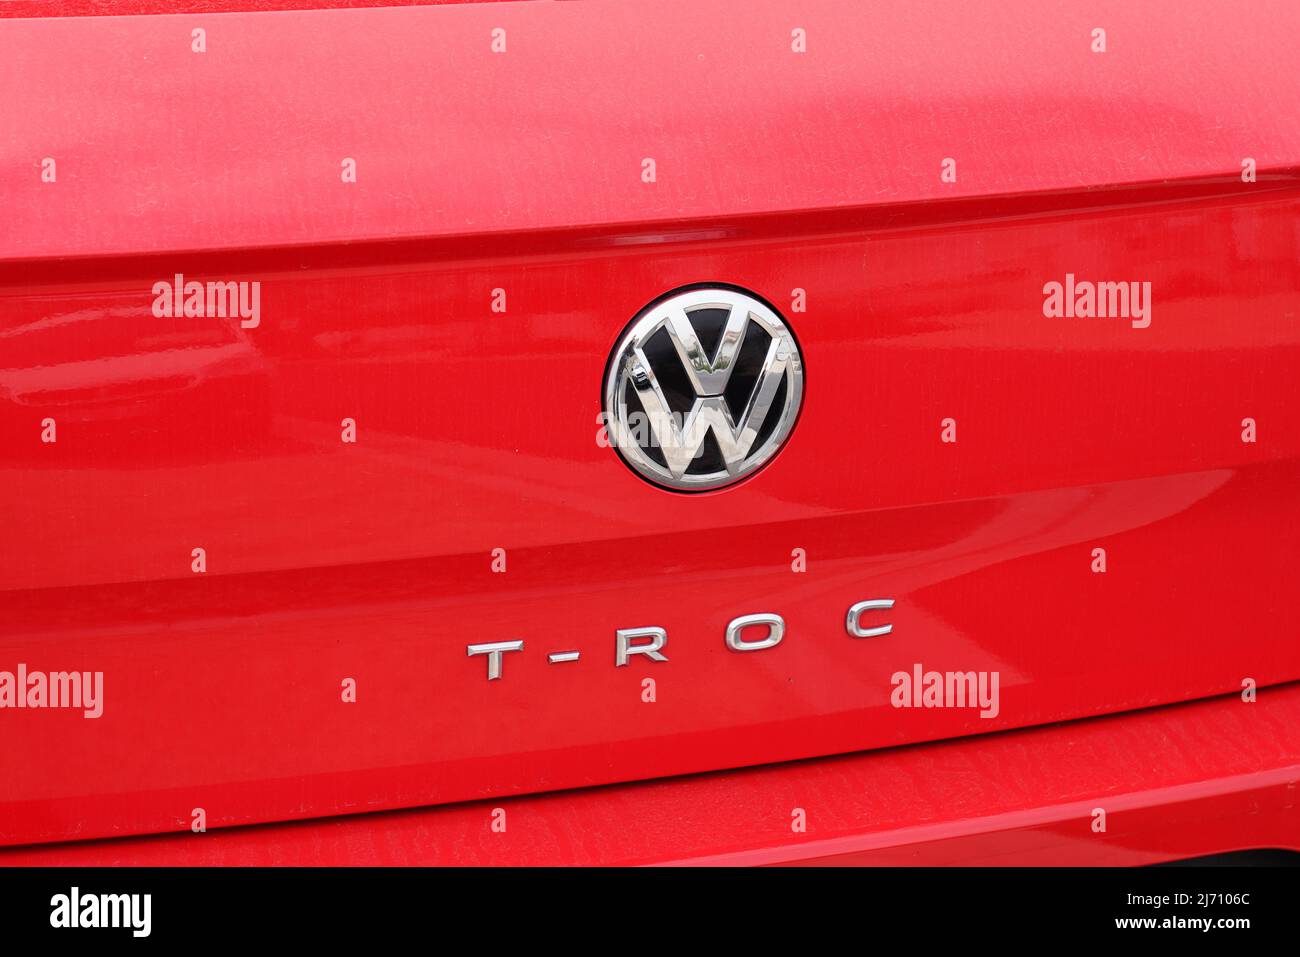 Bordeaux , Aquitaine  France - 04 26 2022 : Volkswagen t-roc line compact car red logo brand and text sign Stock Photo